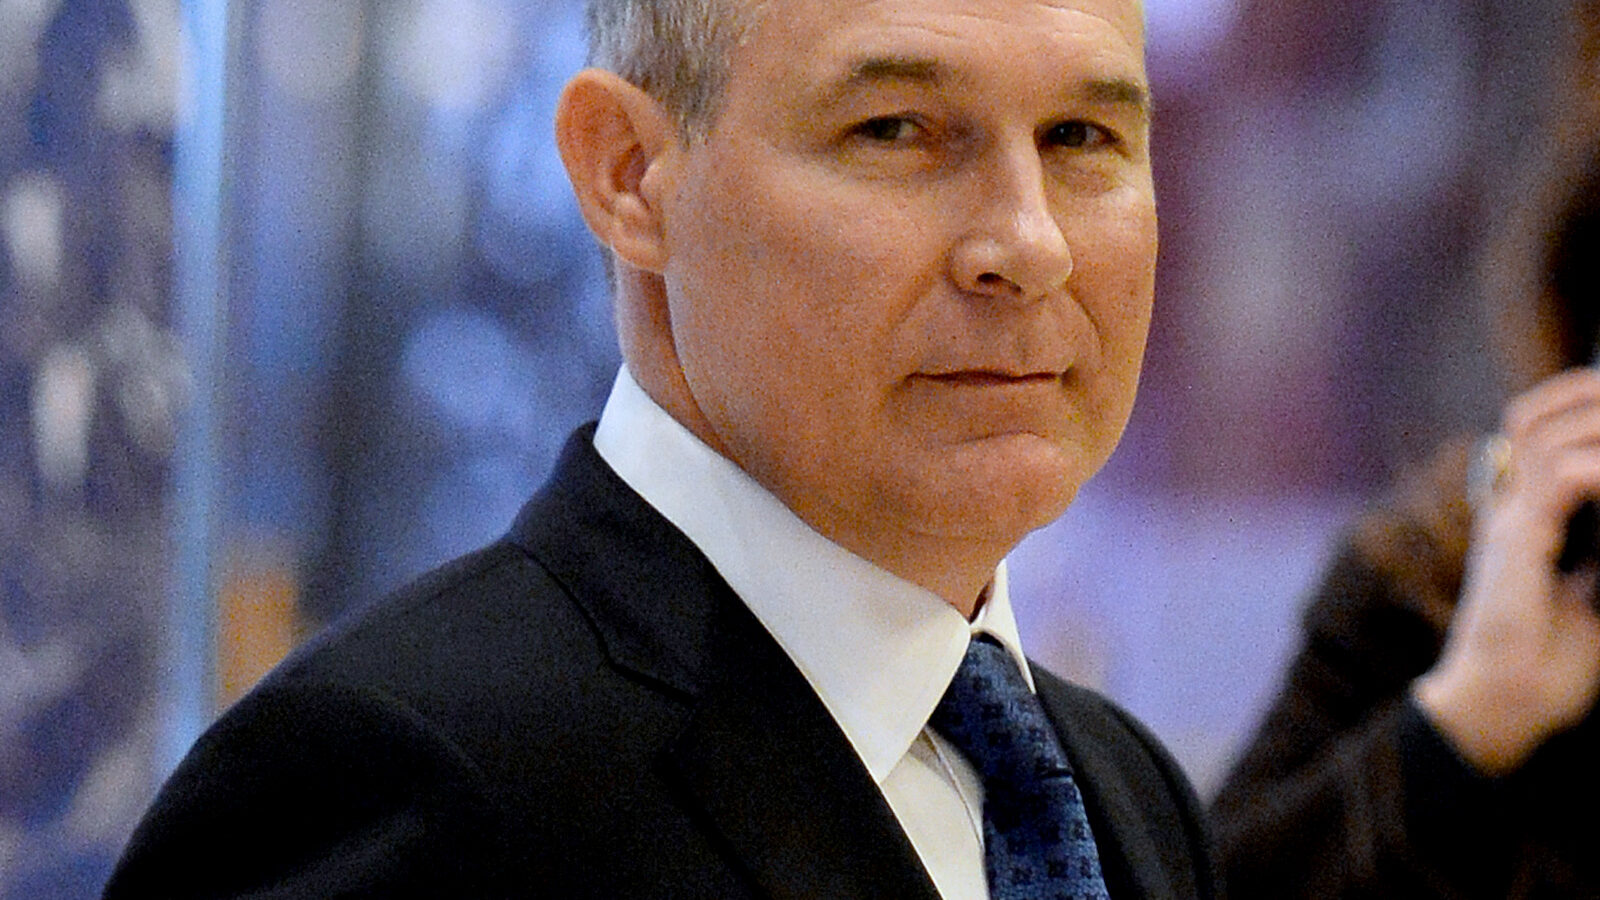 Attorney General Scott Pruitt (Republican of Oklahoma) is seen in the lobby of the Trump Tower in New York, New York, on November 28, 2016. Credit: Anthony Behar / Pool via CNP /MediaPunch/IPX